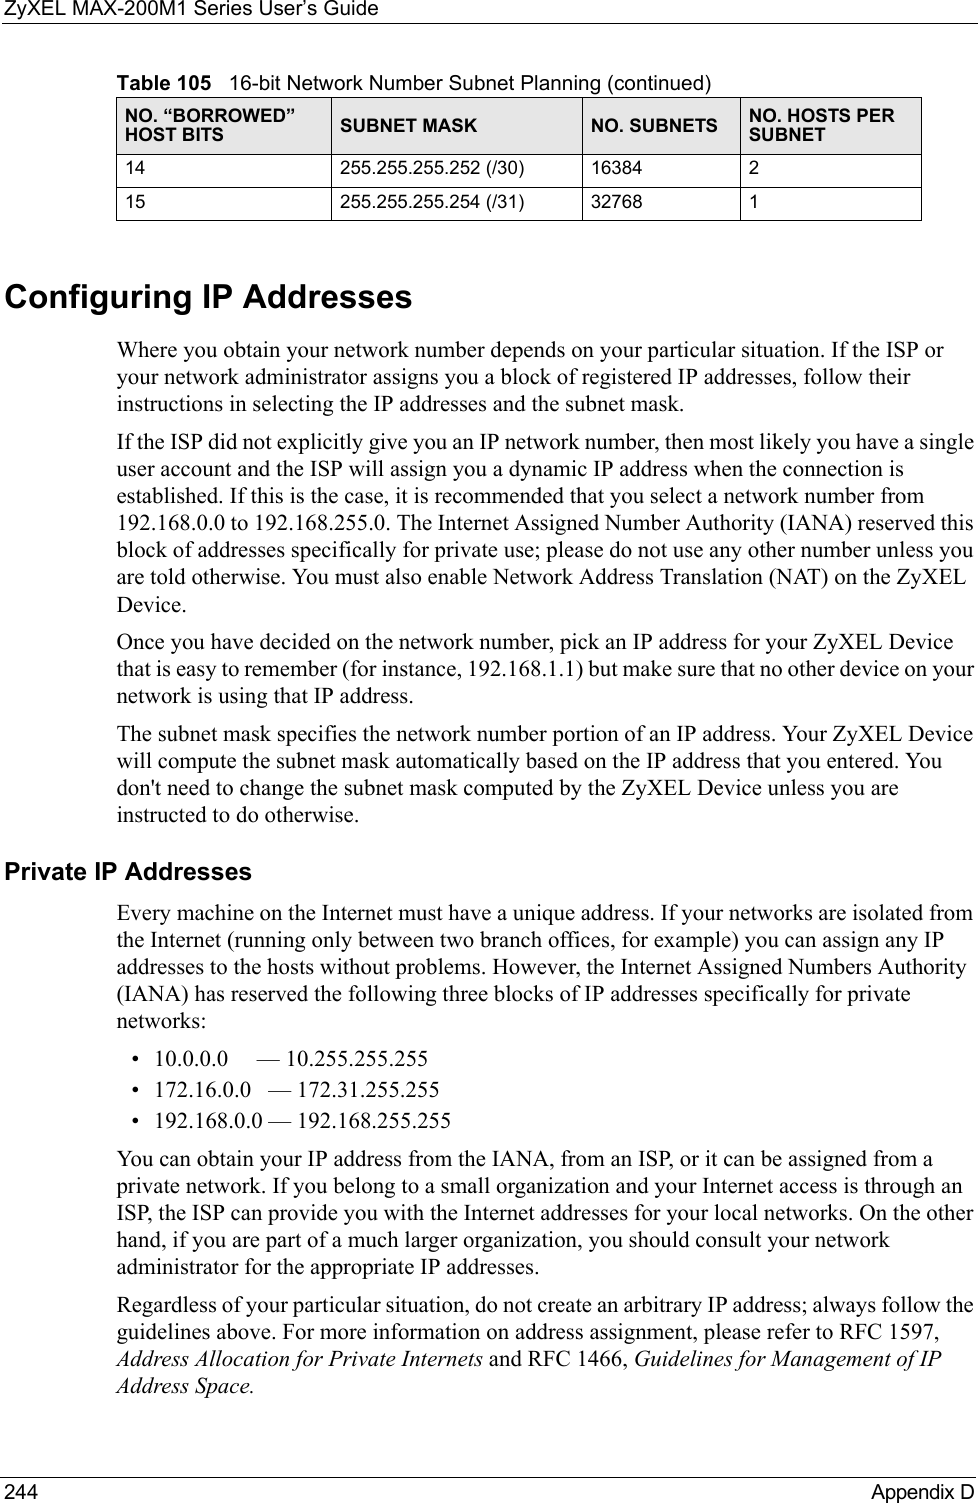 ZyXEL MAX-200M1 Series User’s Guide244 Appendix DConfiguring IP AddressesWhere you obtain your network number depends on your particular situation. If the ISP or your network administrator assigns you a block of registered IP addresses, follow their instructions in selecting the IP addresses and the subnet mask.If the ISP did not explicitly give you an IP network number, then most likely you have a single user account and the ISP will assign you a dynamic IP address when the connection is established. If this is the case, it is recommended that you select a network number from 192.168.0.0 to 192.168.255.0. The Internet Assigned Number Authority (IANA) reserved this block of addresses specifically for private use; please do not use any other number unless you are told otherwise. You must also enable Network Address Translation (NAT) on the ZyXEL Device.  Once you have decided on the network number, pick an IP address for your ZyXEL Device that is easy to remember (for instance, 192.168.1.1) but make sure that no other device on your network is using that IP address.The subnet mask specifies the network number portion of an IP address. Your ZyXEL Device will compute the subnet mask automatically based on the IP address that you entered. You don&apos;t need to change the subnet mask computed by the ZyXEL Device unless you are instructed to do otherwise.Private IP AddressesEvery machine on the Internet must have a unique address. If your networks are isolated from the Internet (running only between two branch offices, for example) you can assign any IP addresses to the hosts without problems. However, the Internet Assigned Numbers Authority (IANA) has reserved the following three blocks of IP addresses specifically for private networks:• 10.0.0.0     — 10.255.255.255• 172.16.0.0   — 172.31.255.255• 192.168.0.0 — 192.168.255.255You can obtain your IP address from the IANA, from an ISP, or it can be assigned from a private network. If you belong to a small organization and your Internet access is through an ISP, the ISP can provide you with the Internet addresses for your local networks. On the other hand, if you are part of a much larger organization, you should consult your network administrator for the appropriate IP addresses.Regardless of your particular situation, do not create an arbitrary IP address; always follow the guidelines above. For more information on address assignment, please refer to RFC 1597, Address Allocation for Private Internets and RFC 1466, Guidelines for Management of IP Address Space.14 255.255.255.252 (/30) 16384 215 255.255.255.254 (/31) 32768 1Table 105   16-bit Network Number Subnet Planning (continued)NO. “BORROWED” HOST BITS SUBNET MASK NO. SUBNETS NO. HOSTS PER SUBNET